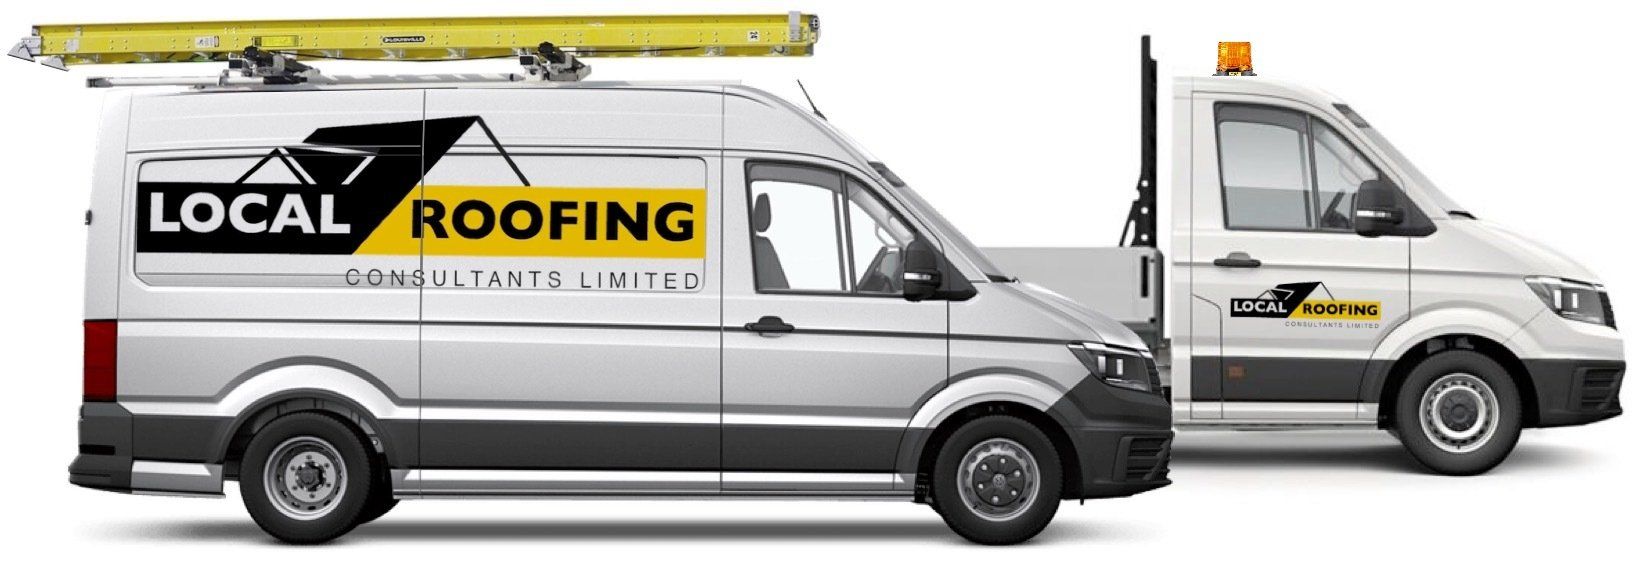 Local Roofing Consultants Limited work in Sutton and throughout the London area